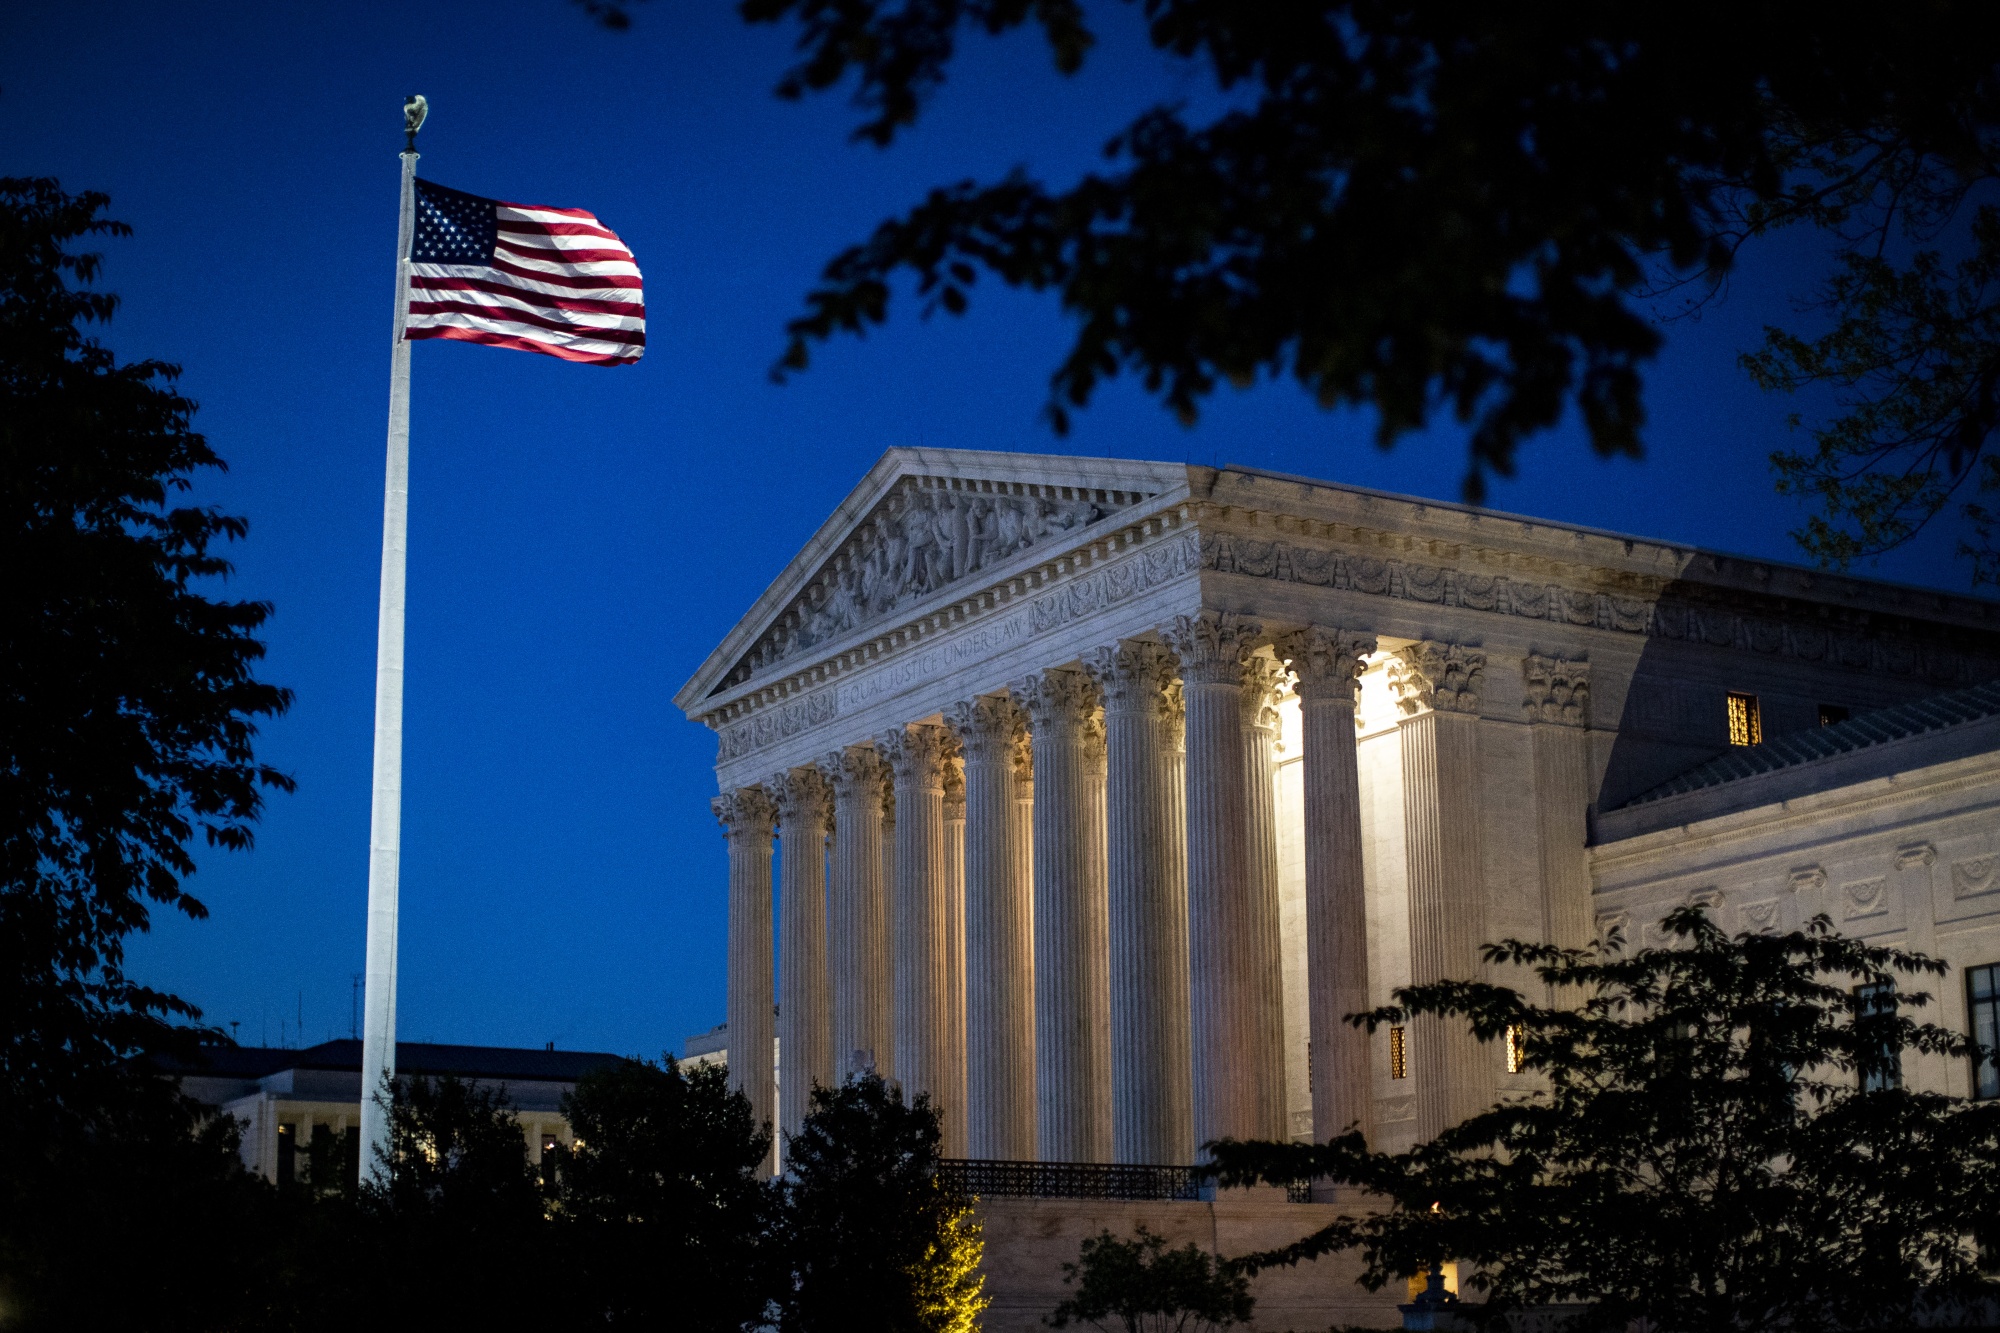 An American flag flies outside the U.S. Supreme Court as it stands illuminated at night in Washington, D.C. on May 4, 2020.&nbsp;